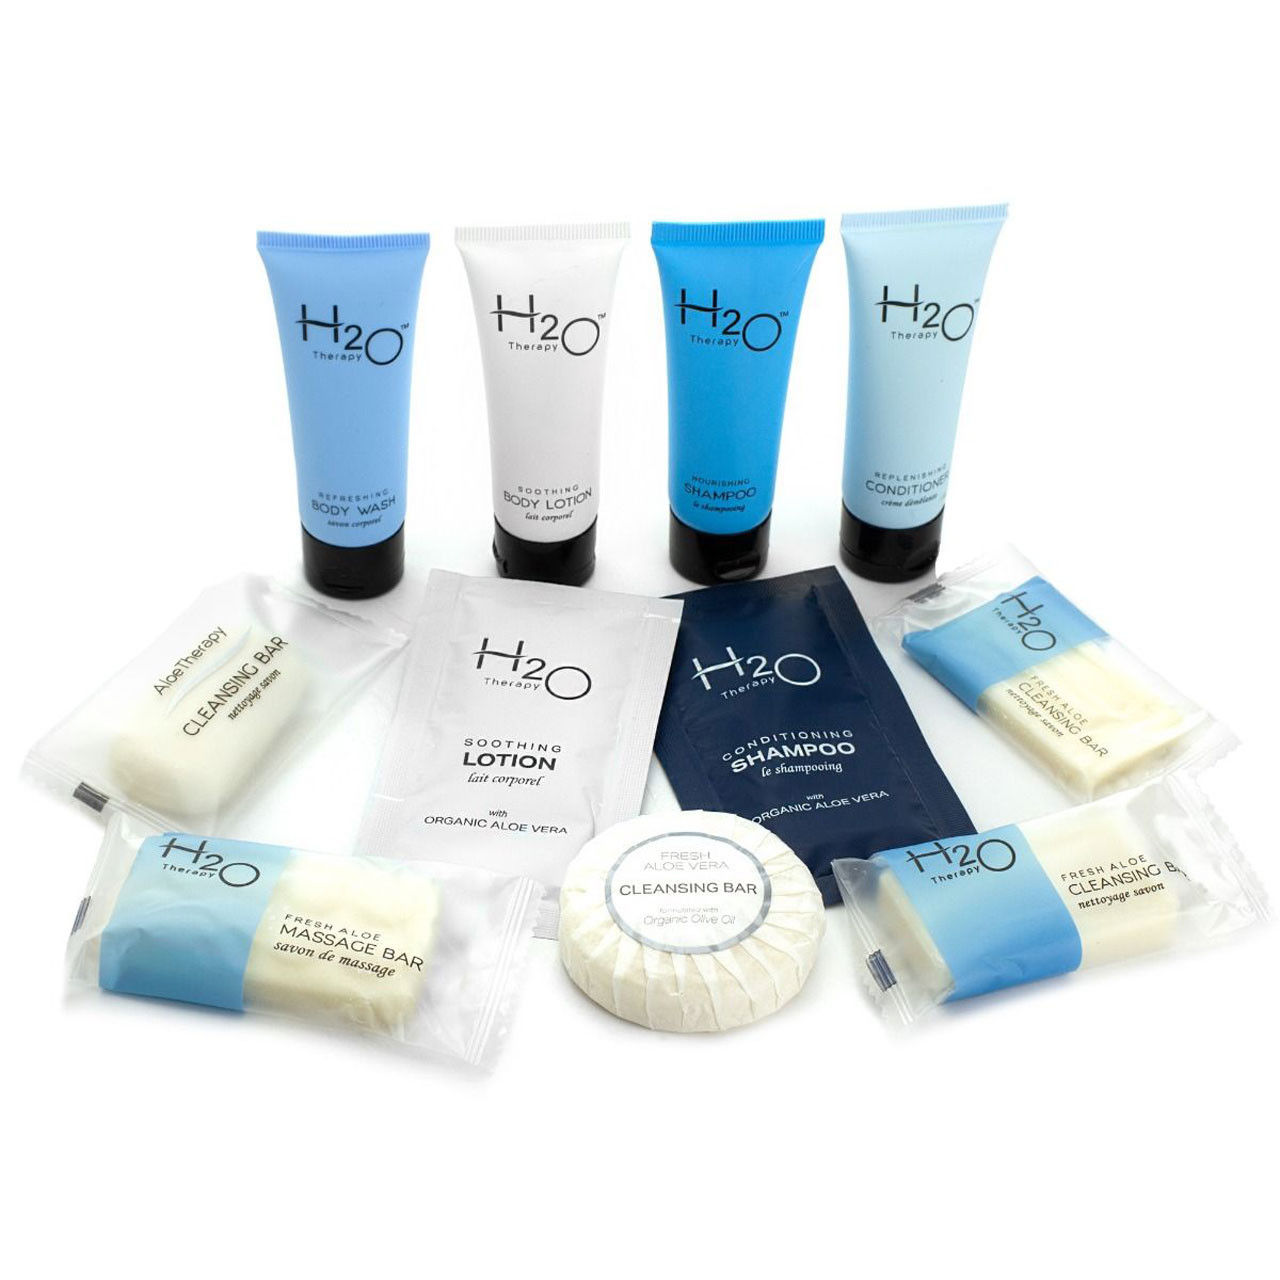 What h2o therapy shampoo amenities are included in the H2O Therapy Collection?